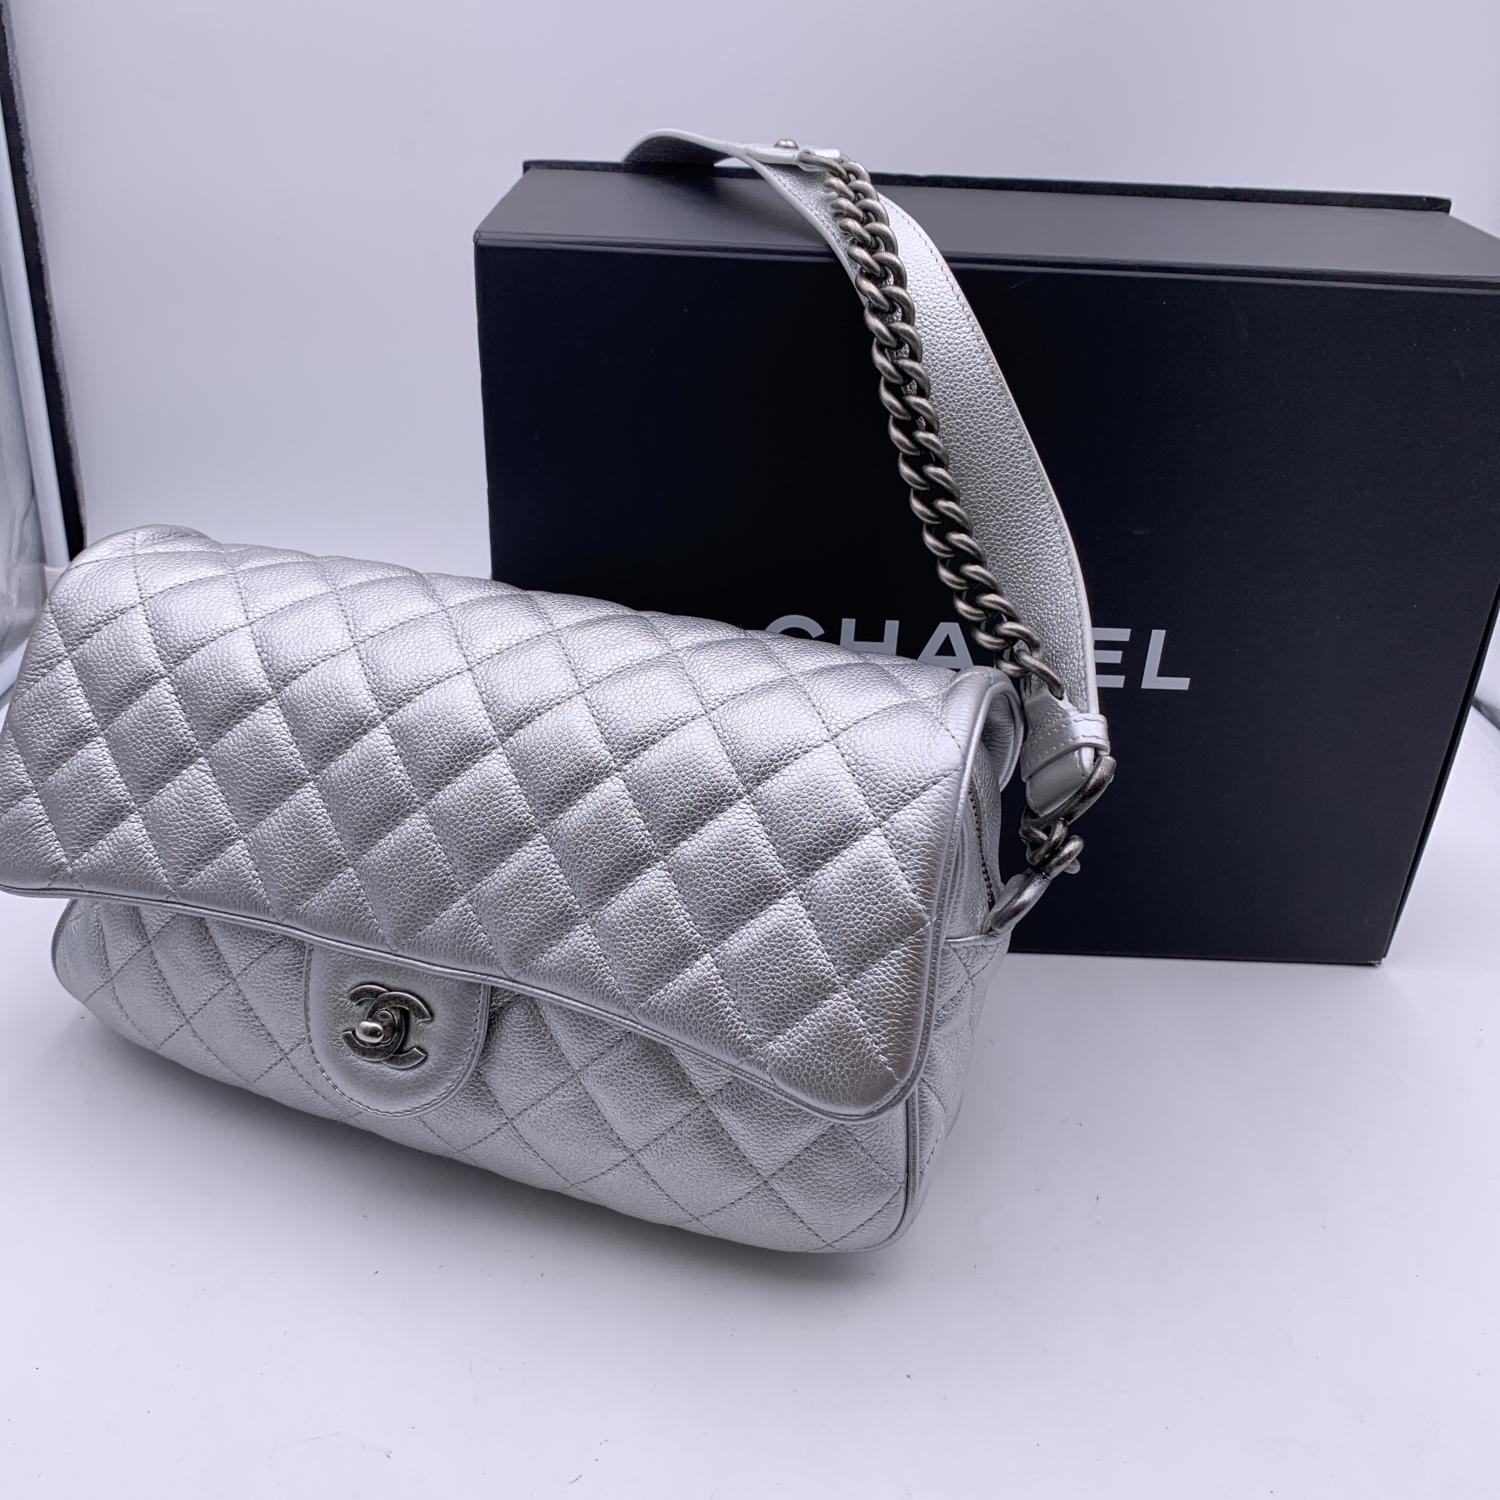 Chanel Limited Edition 